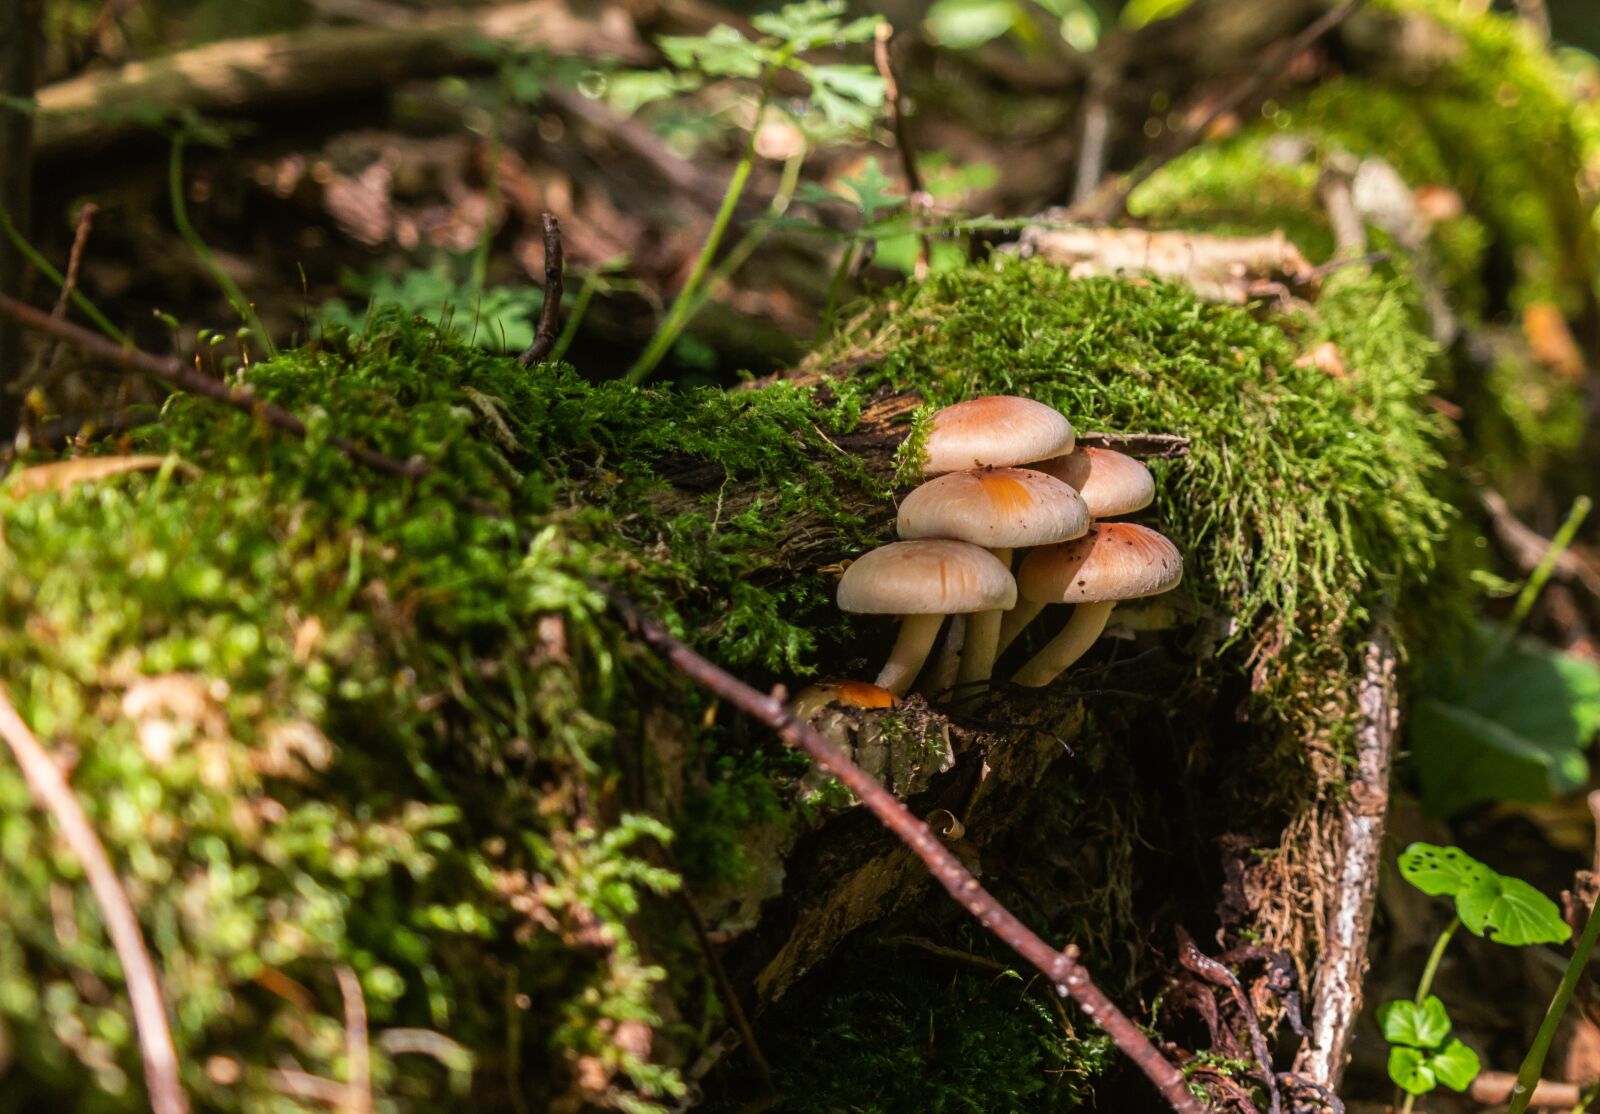 Samsung NX300 sample photo. Forest, mushrooms, nature photography